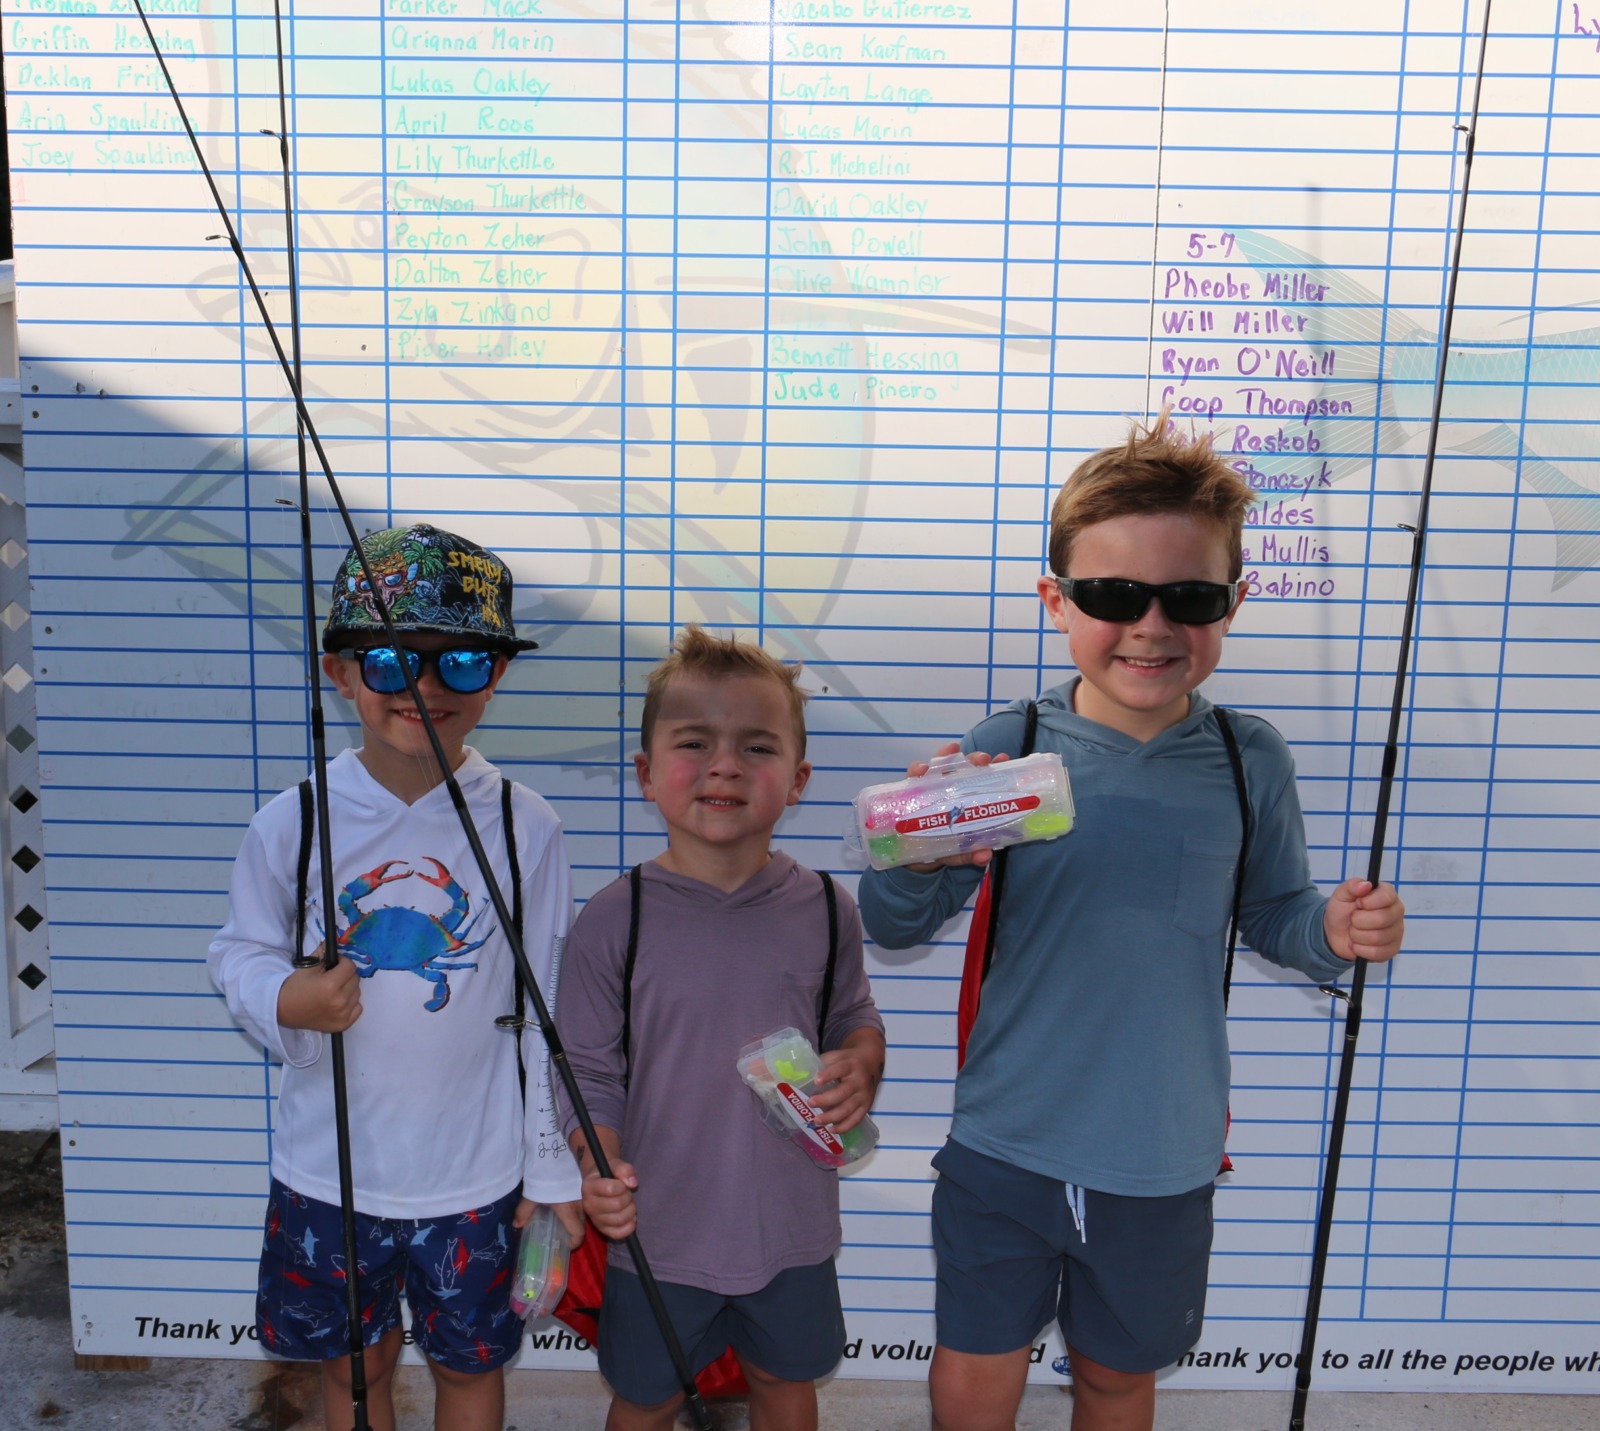 KEYS KIDS FISH: 26TH ANNUAL DERBY IN ISLAMORADA IS FREE TO YOUNG